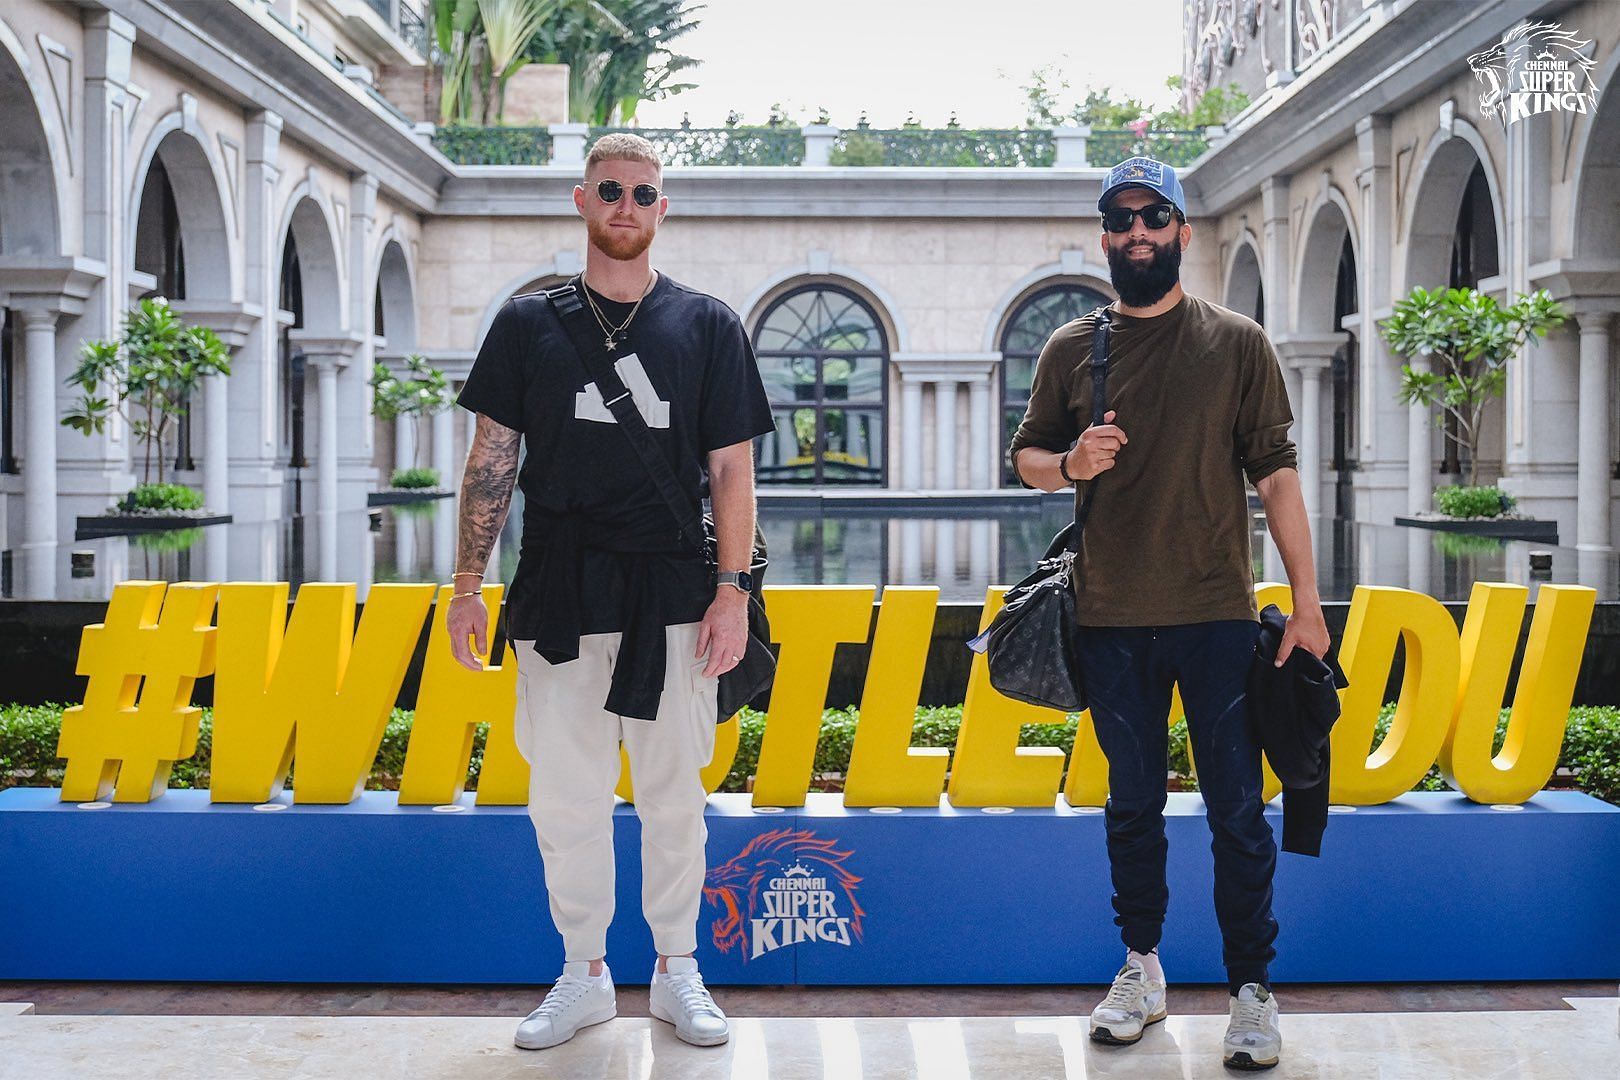 Ben Stokes and Moeen Ali have two distinctly different beards. (Image: Twitter/@ChennaiIPL)